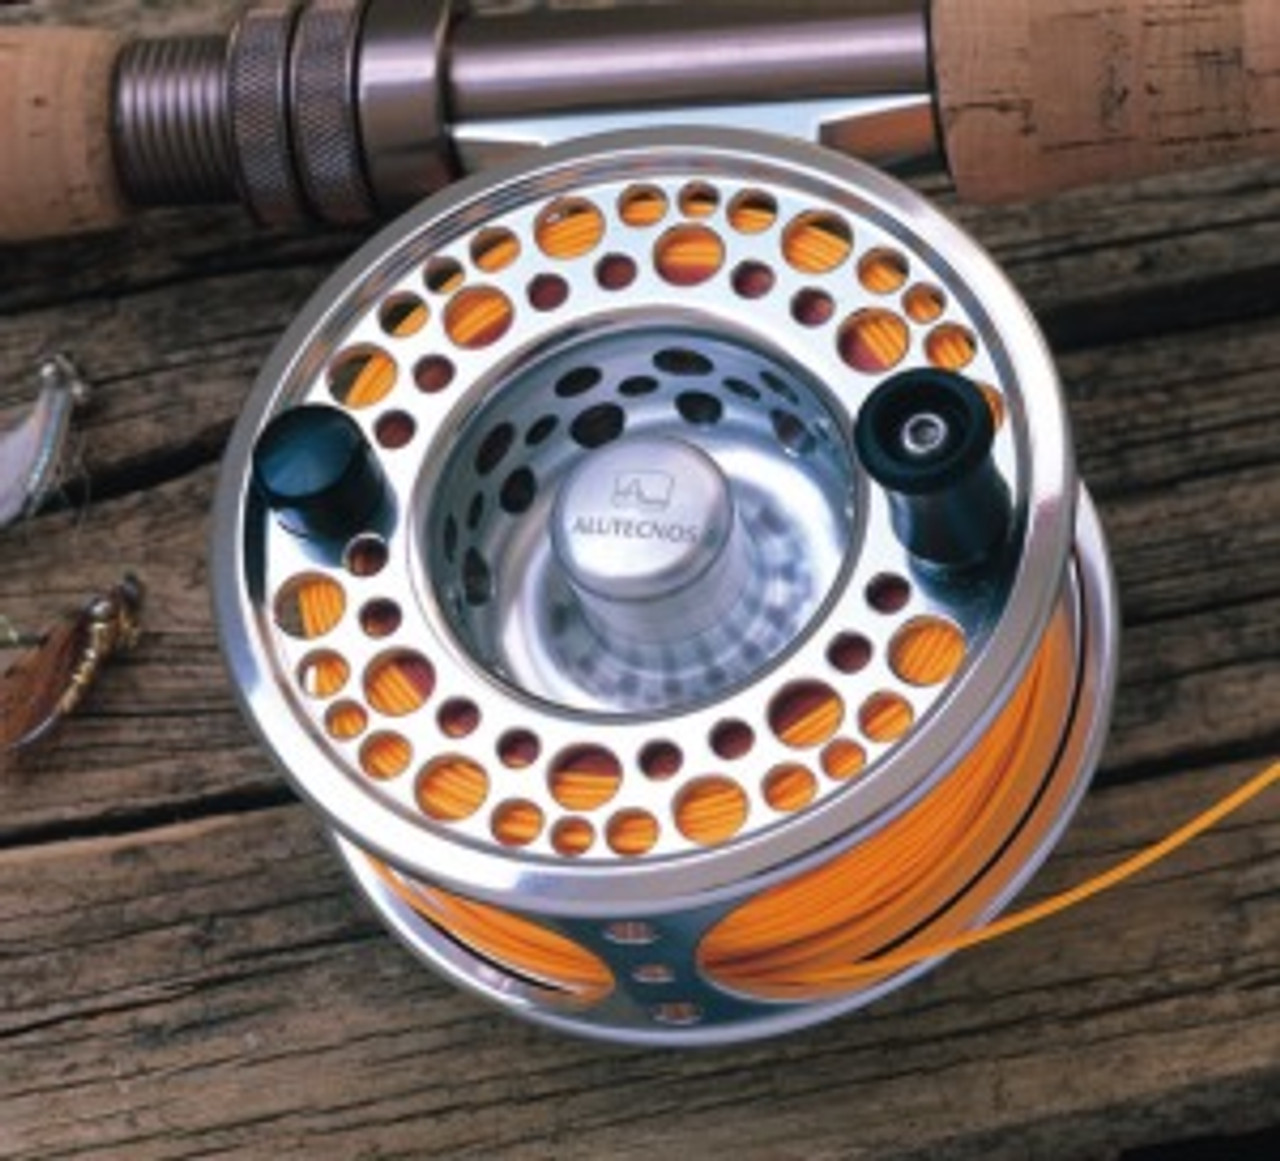 Alutecnos Saltwater Fly Reel 6 Weight Silver